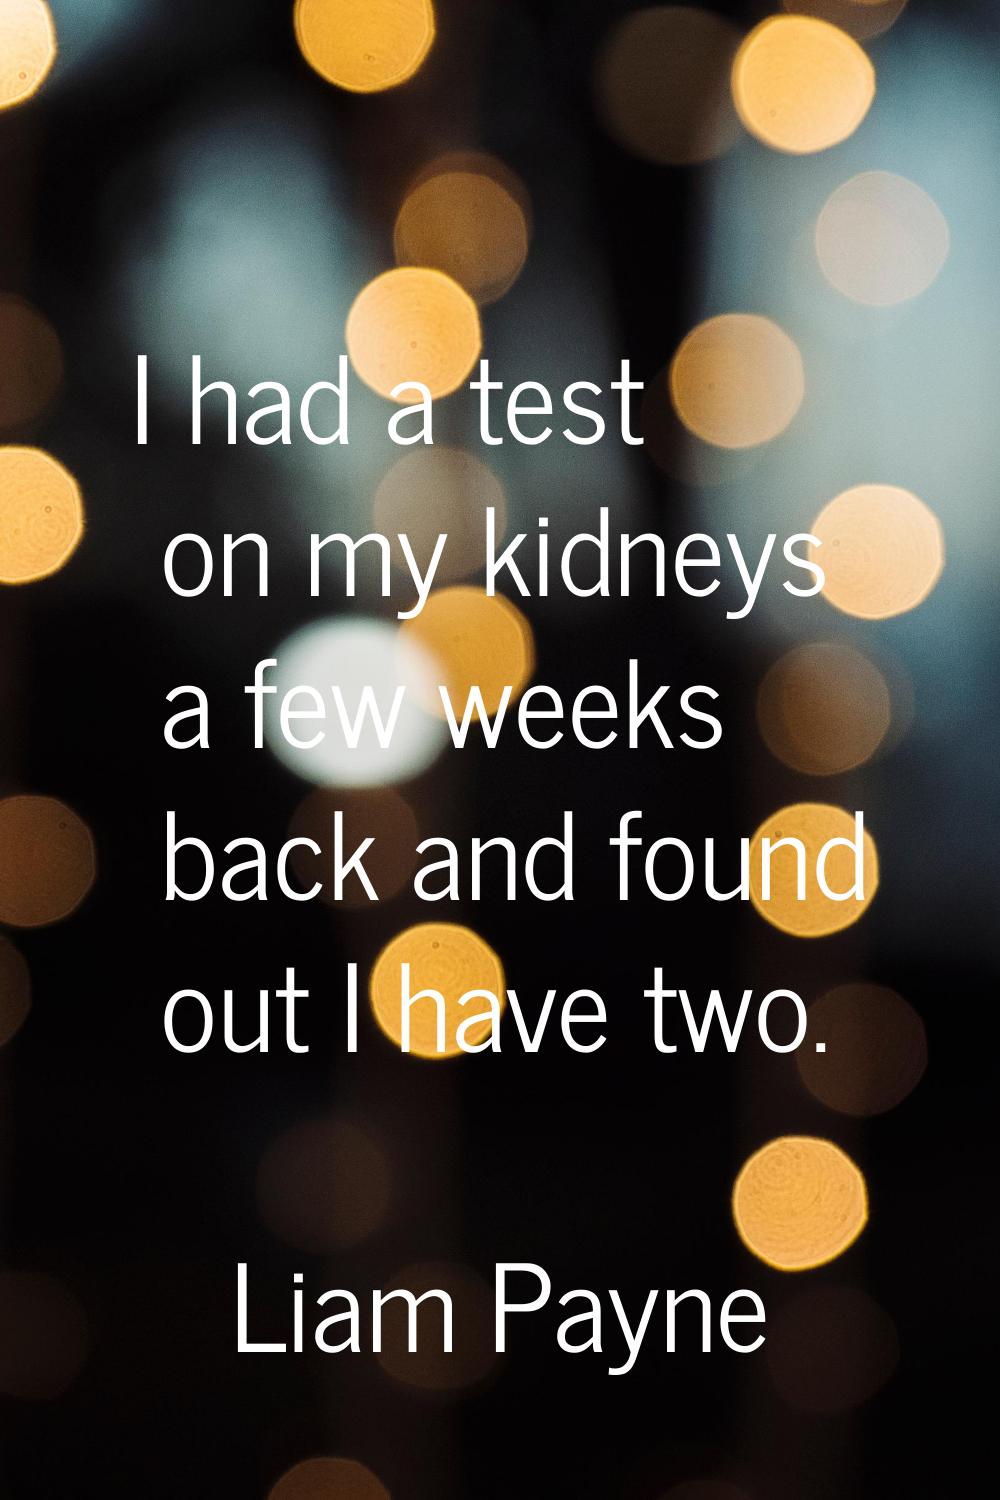 I had a test on my kidneys a few weeks back and found out I have two.